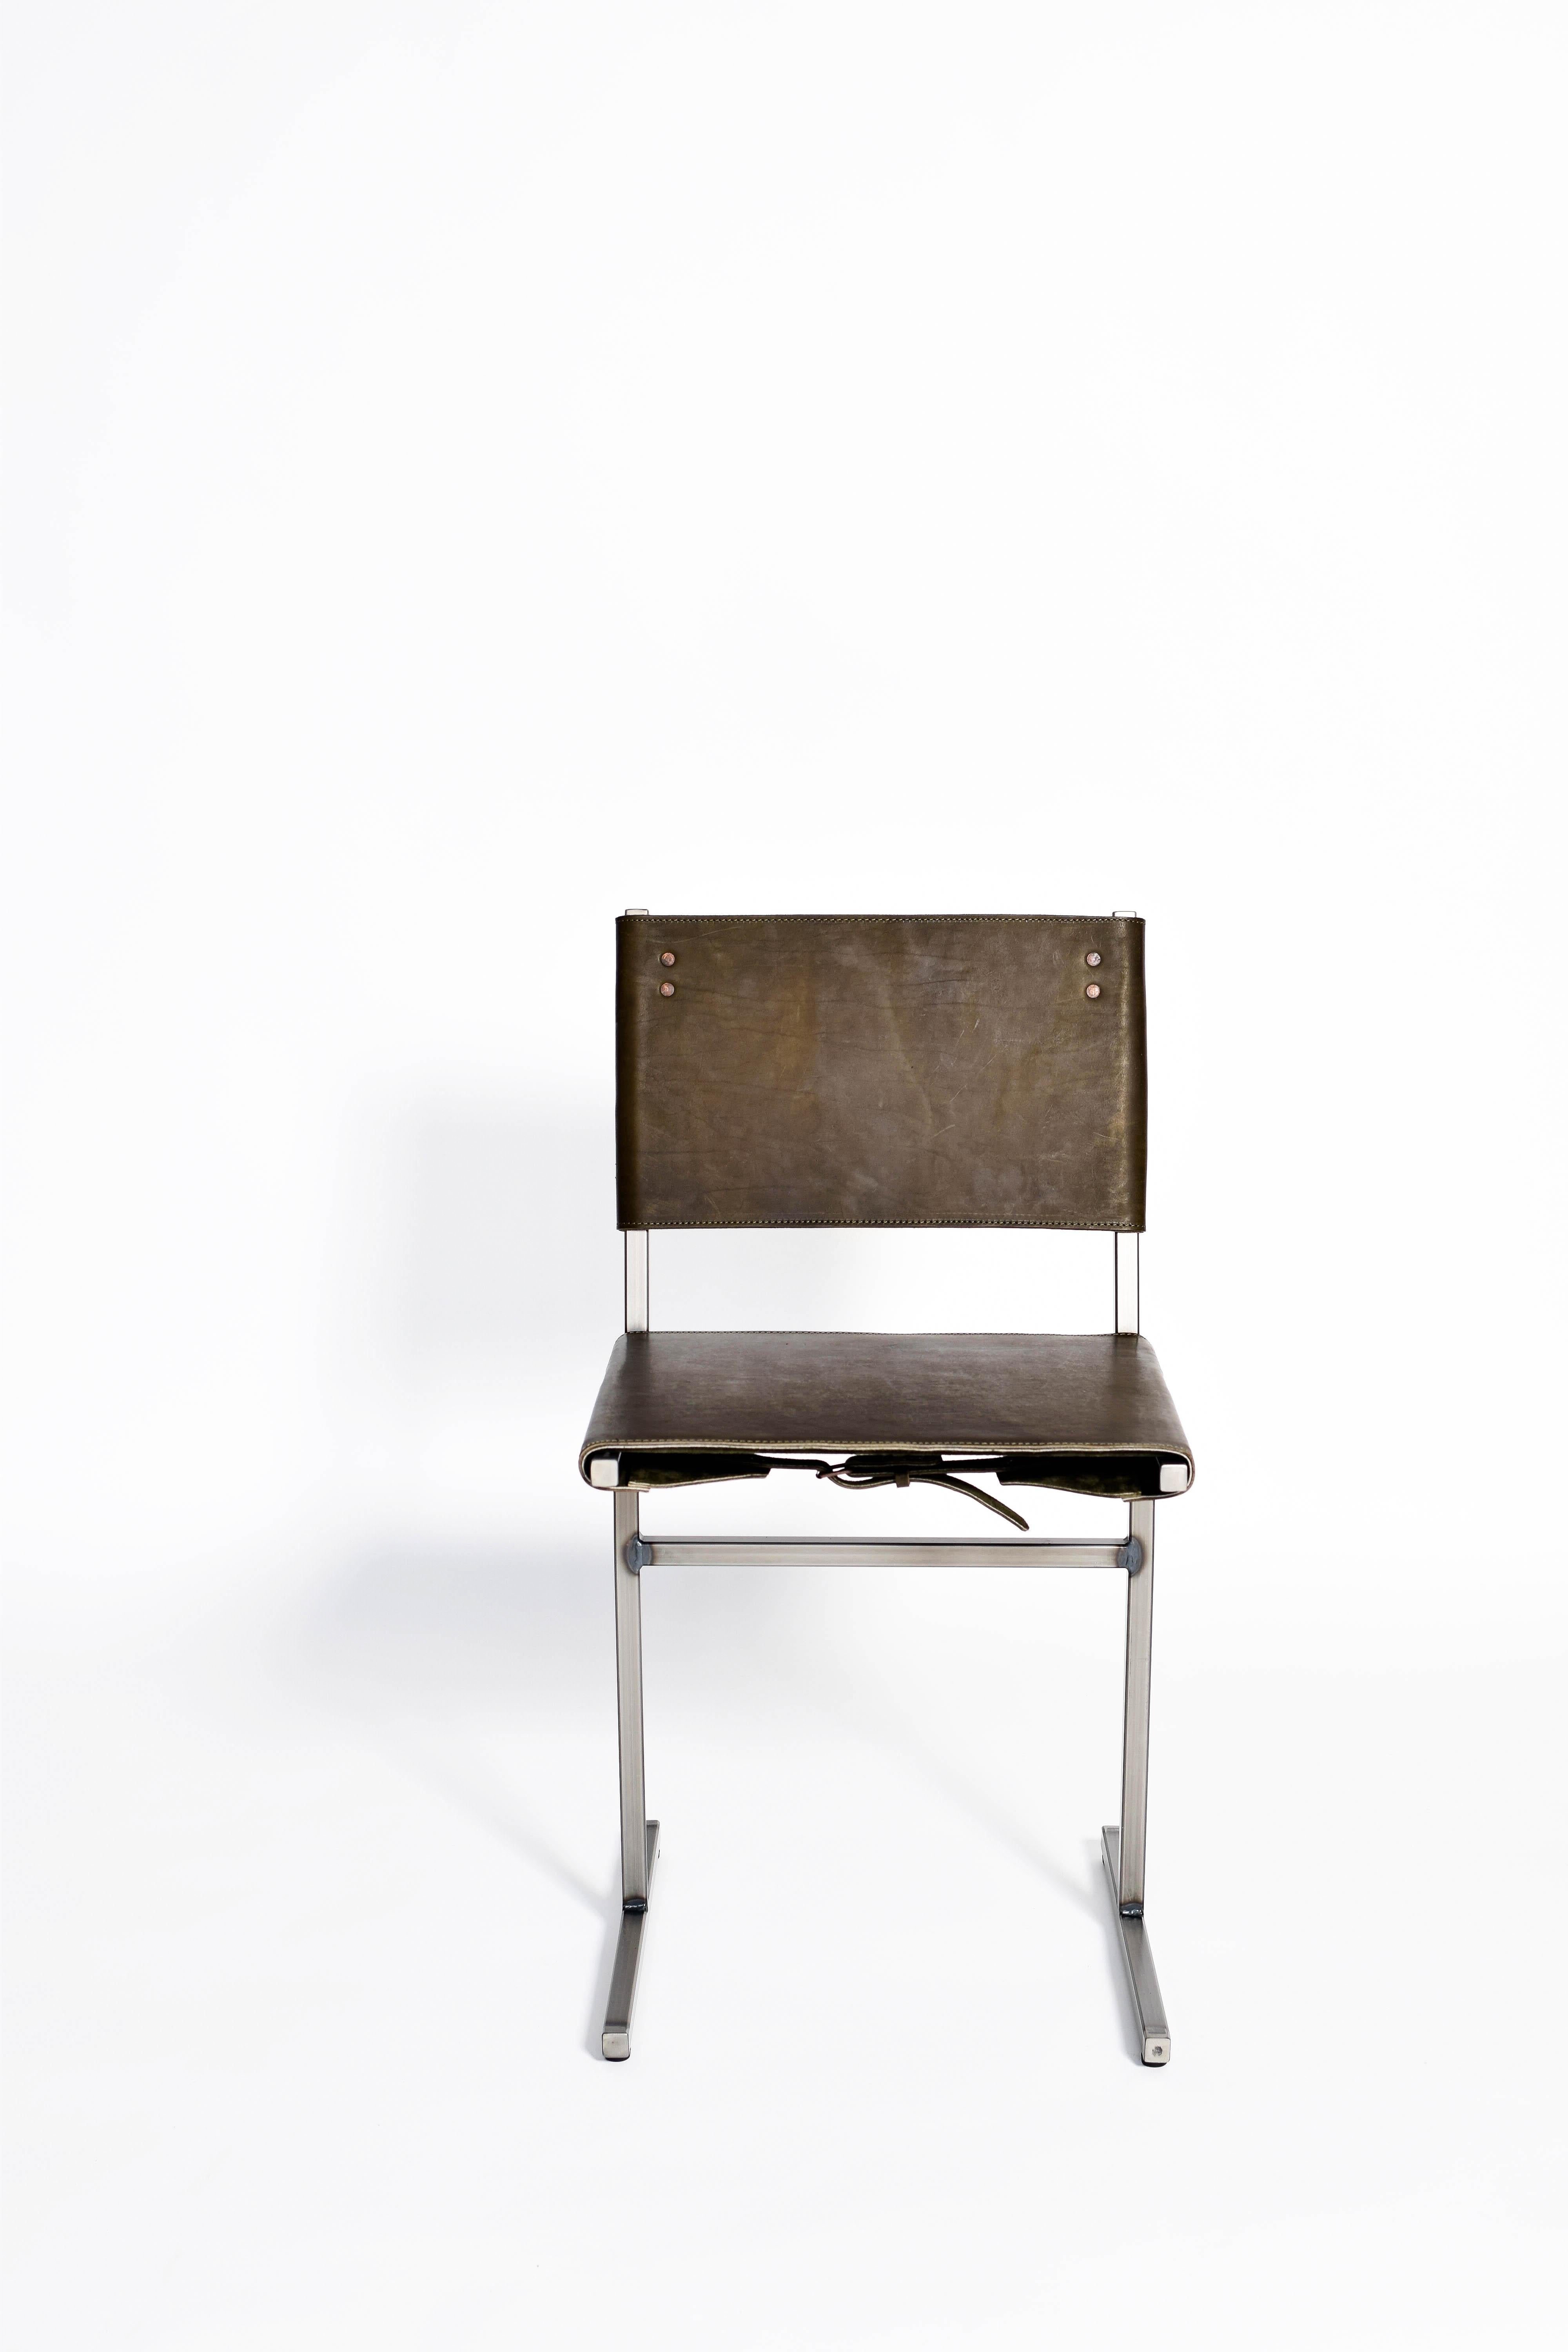 Moss green Memento chair, Jesse Sanderson
Original signed chair by Jesse Sanderson
Materials: Leather, steel
Dimensions: W 43 x D 50 x H 80 cm
Seating height 47 cm

Frame finishes available in brass, bare steel, Matt black.

Five lines and a